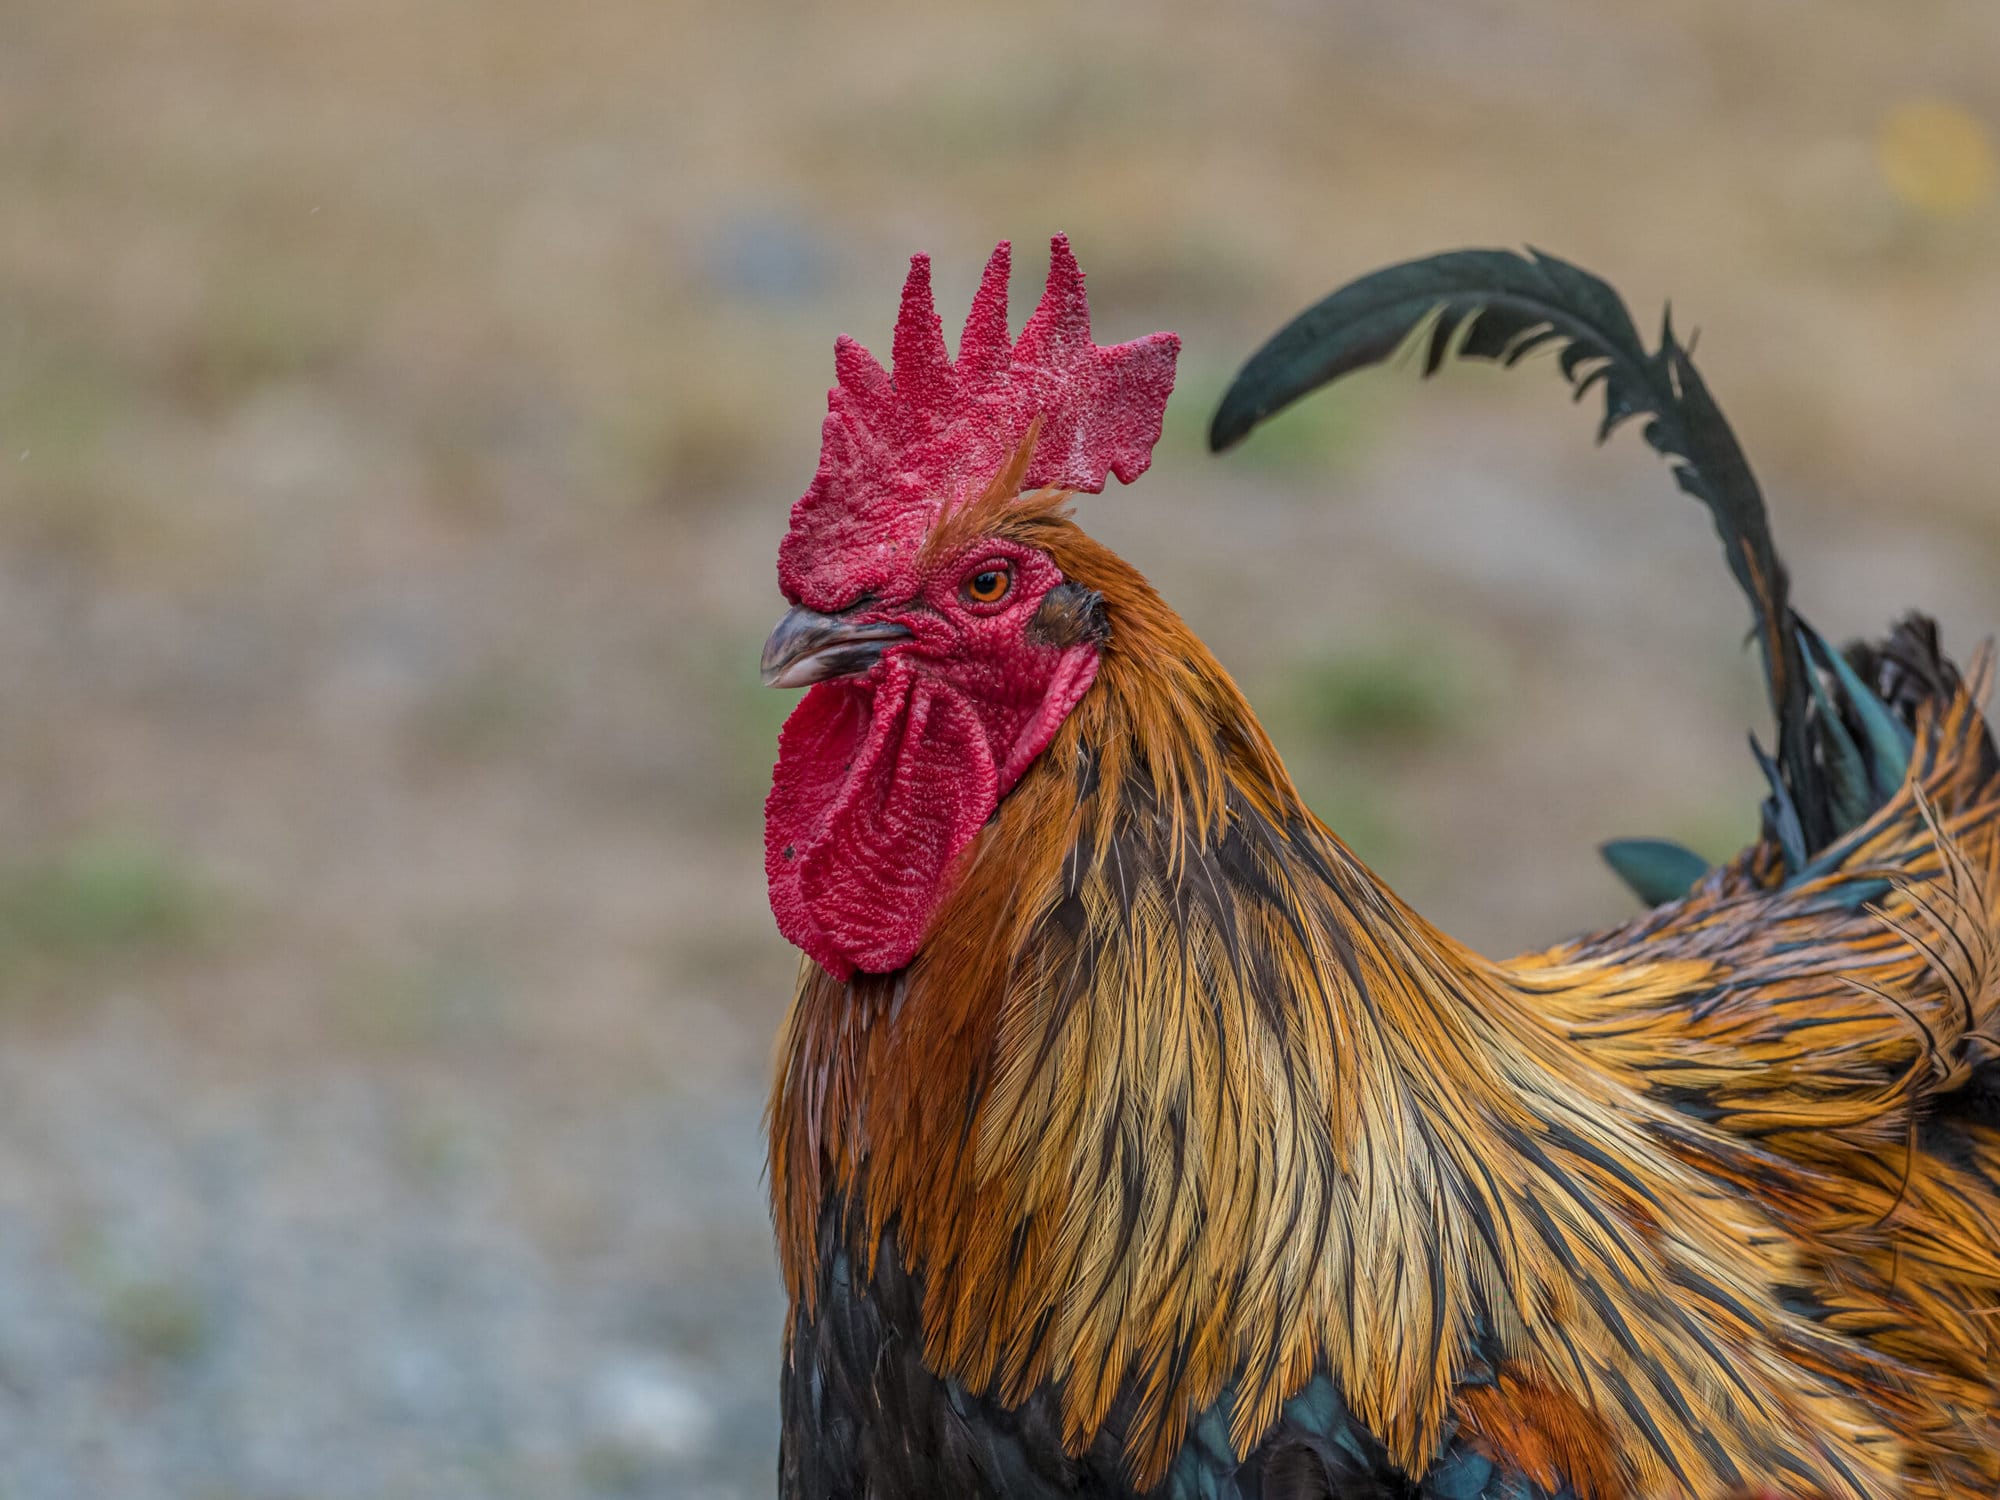 Can People Perceive the Language of Chickens?